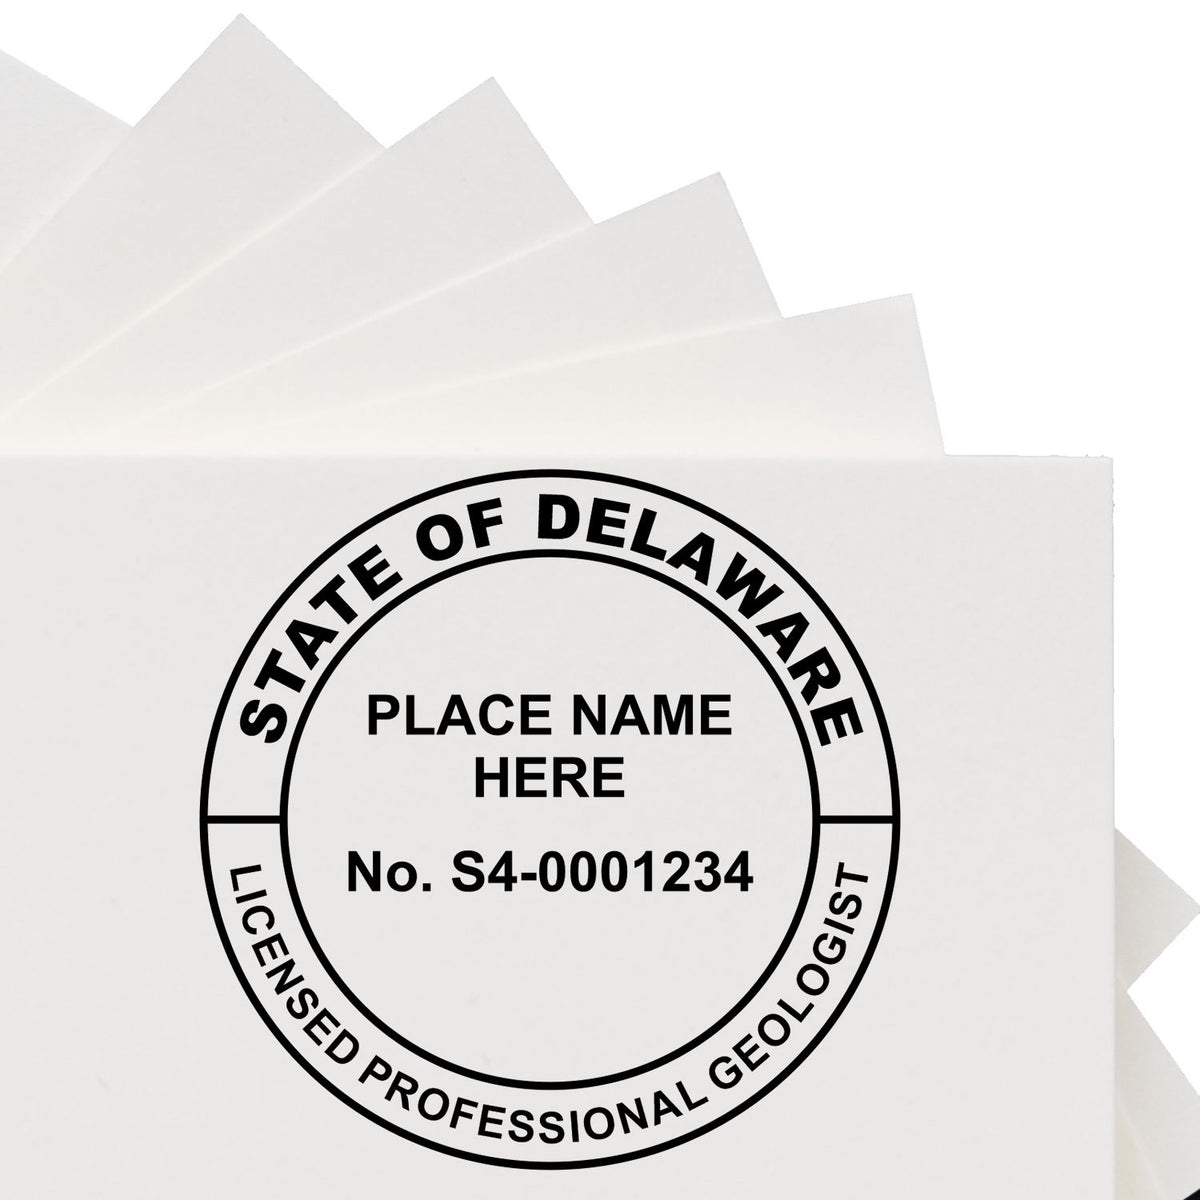 A lifestyle photo showing a stamped image of the Slim Pre-Inked Delaware Professional Geologist Seal Stamp on a piece of paper